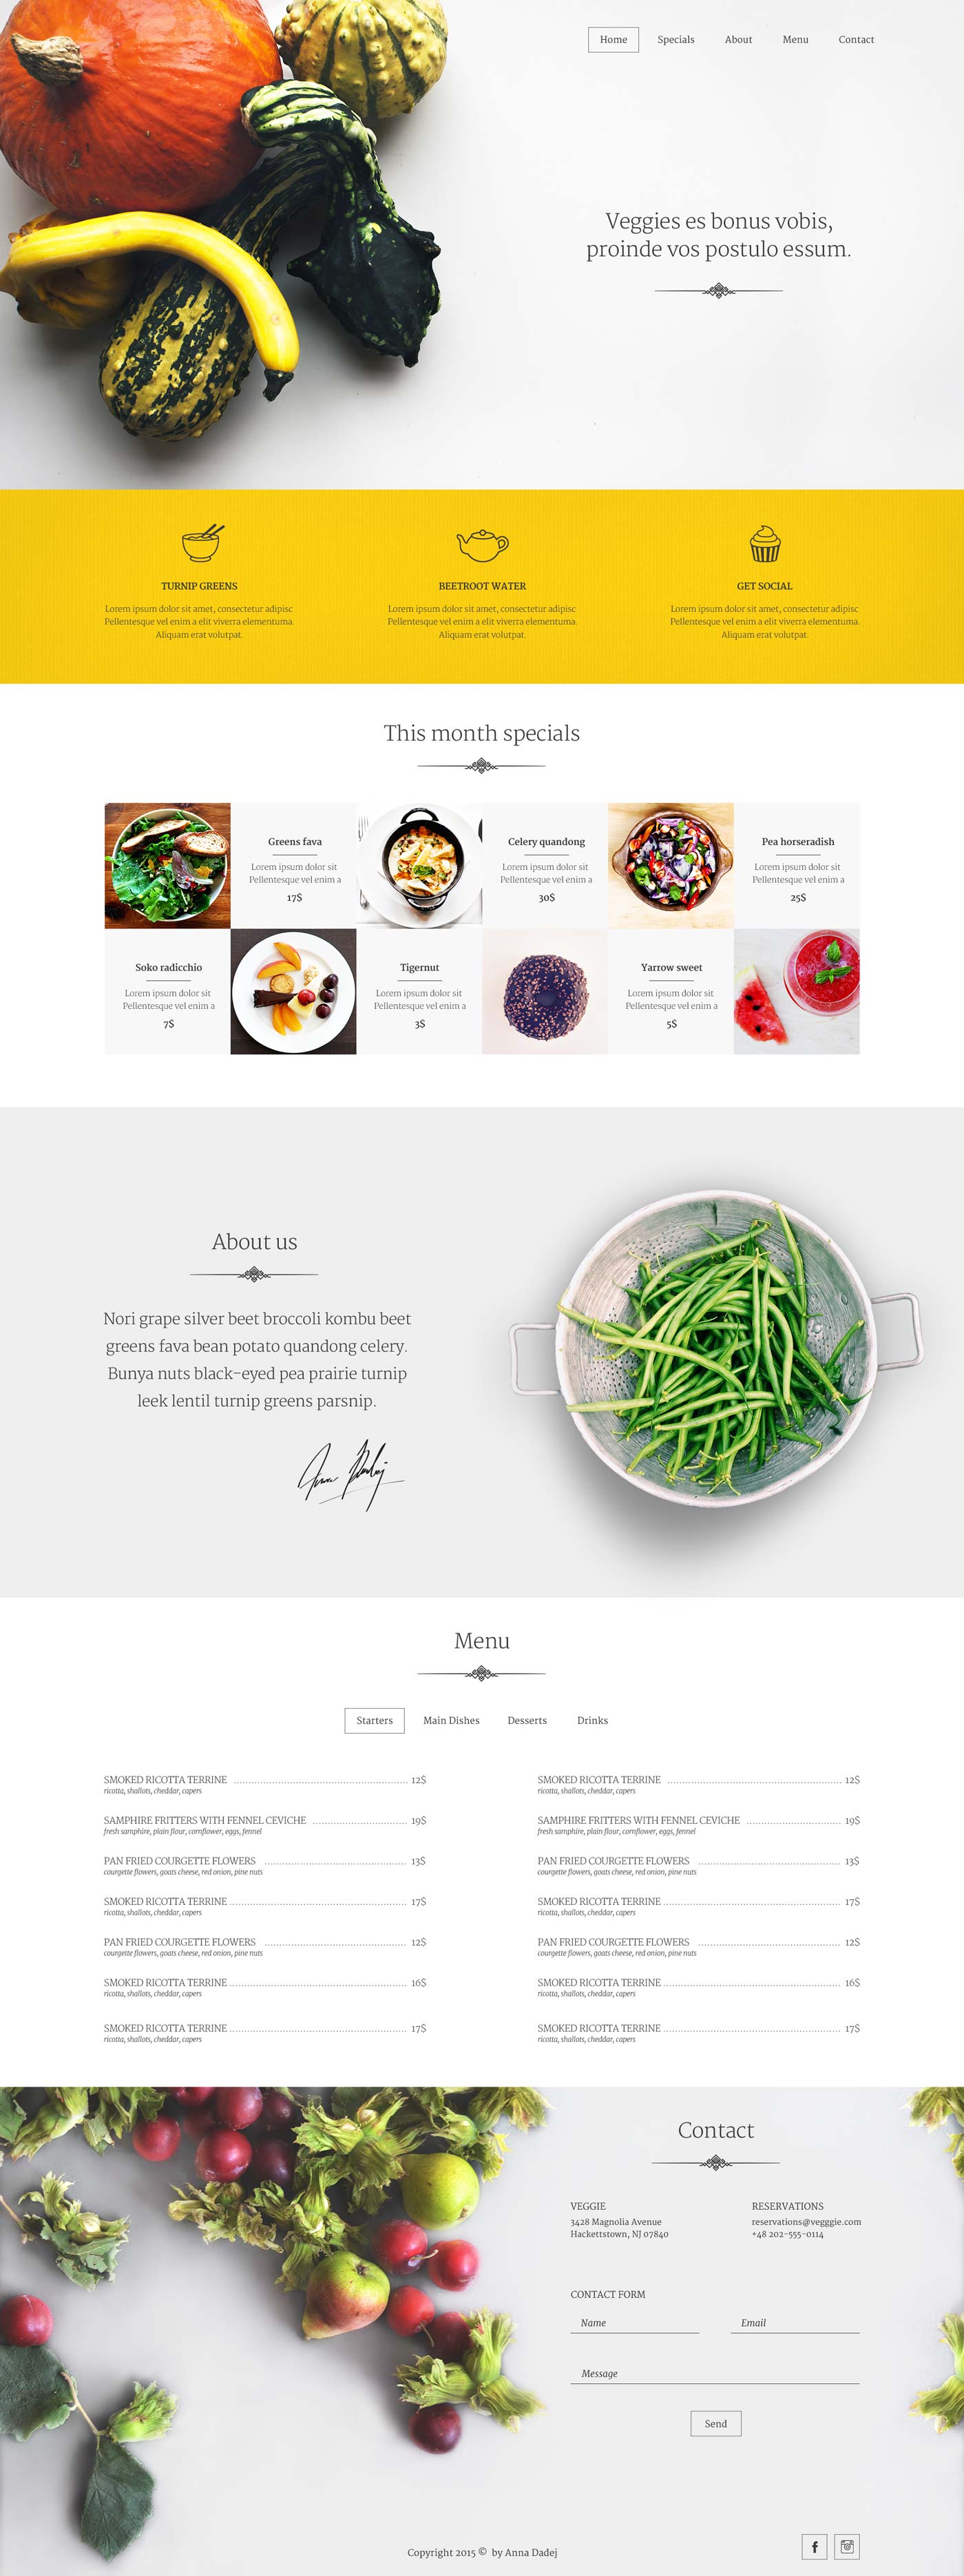 Veggie - FREE One Page PSD Template